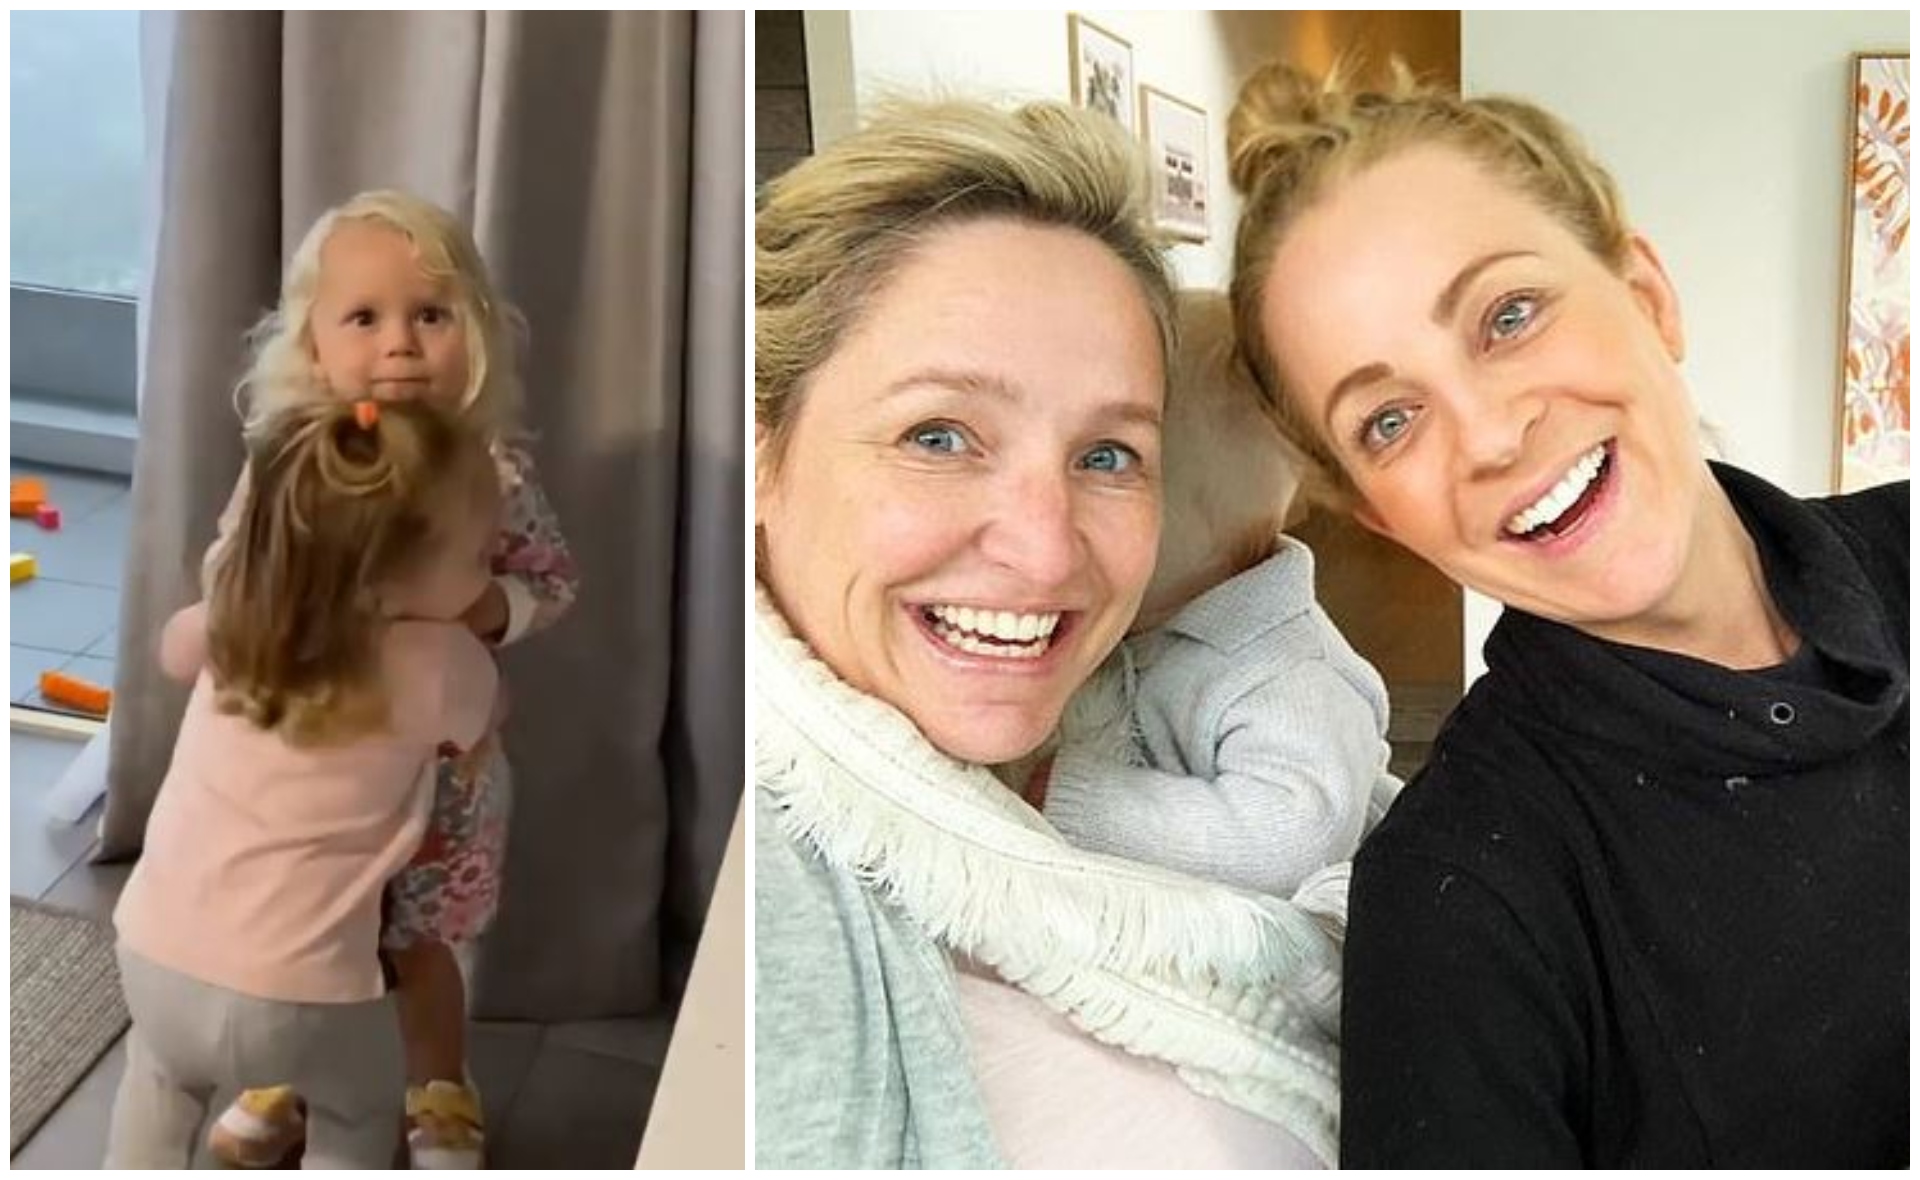 Heartmelt warning: Carrie Bickmore and Fifi Box just shared the cutest kiddie playdate moment with their toddler daughters